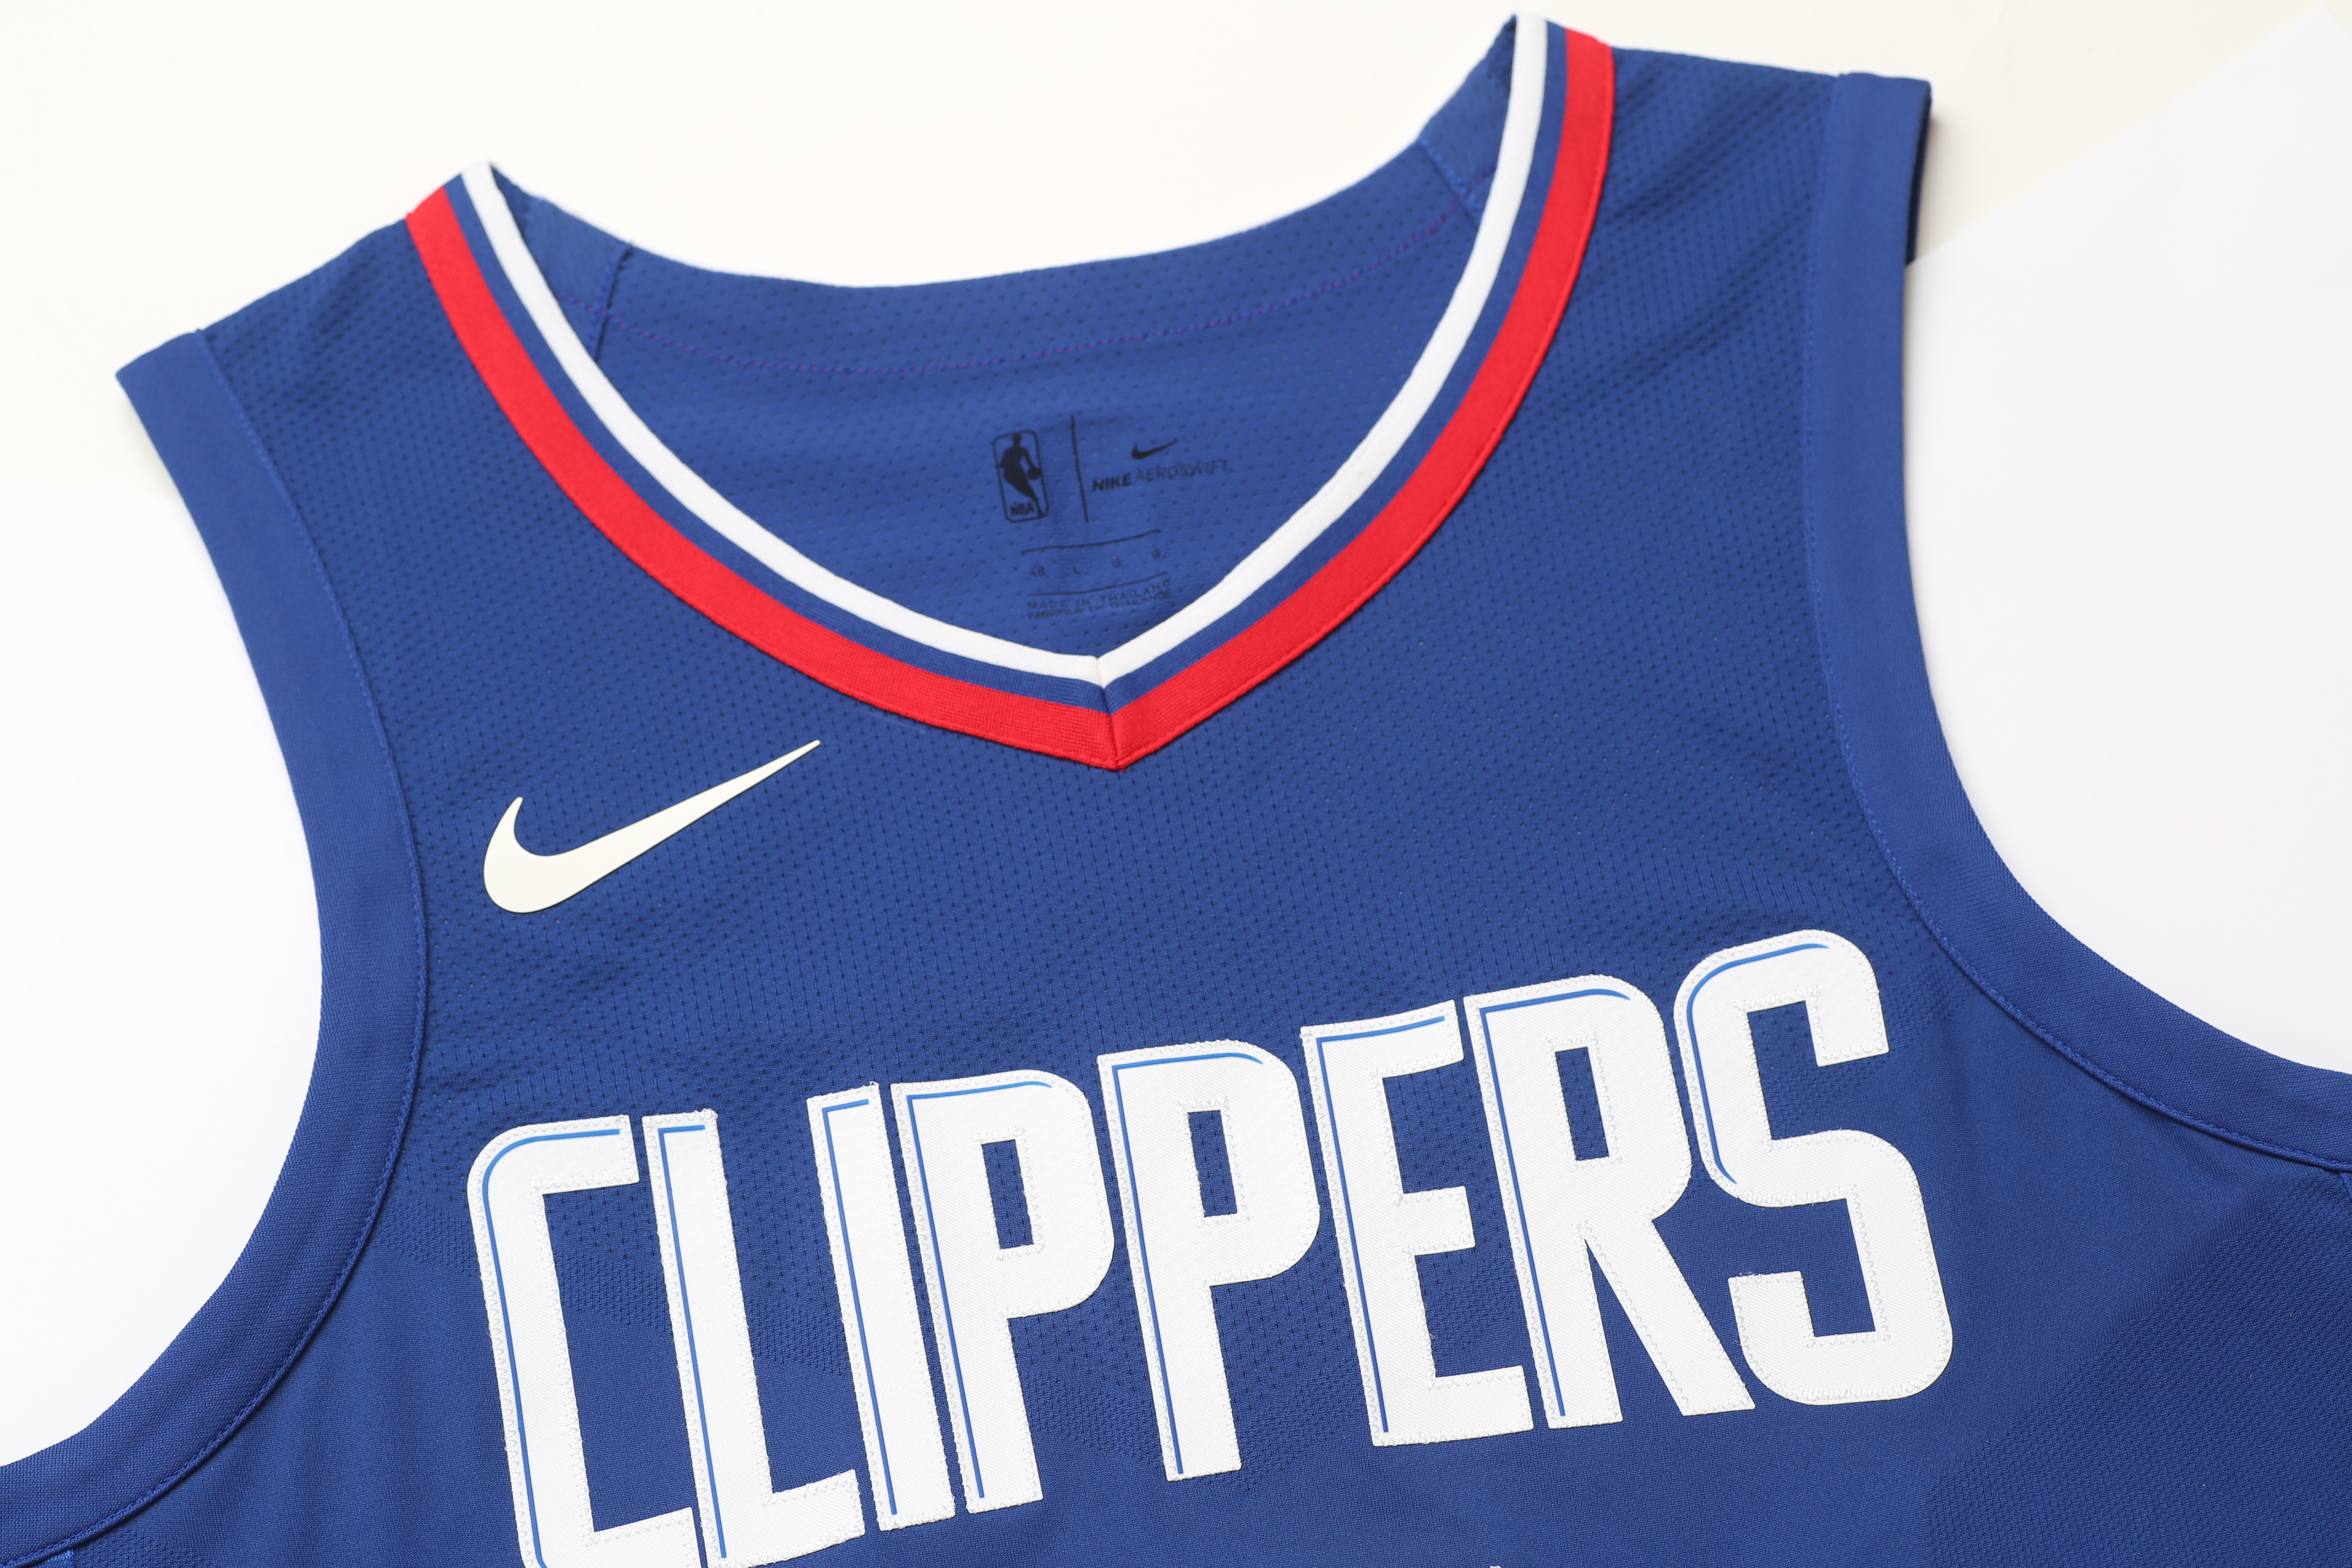 clippers concept jersey